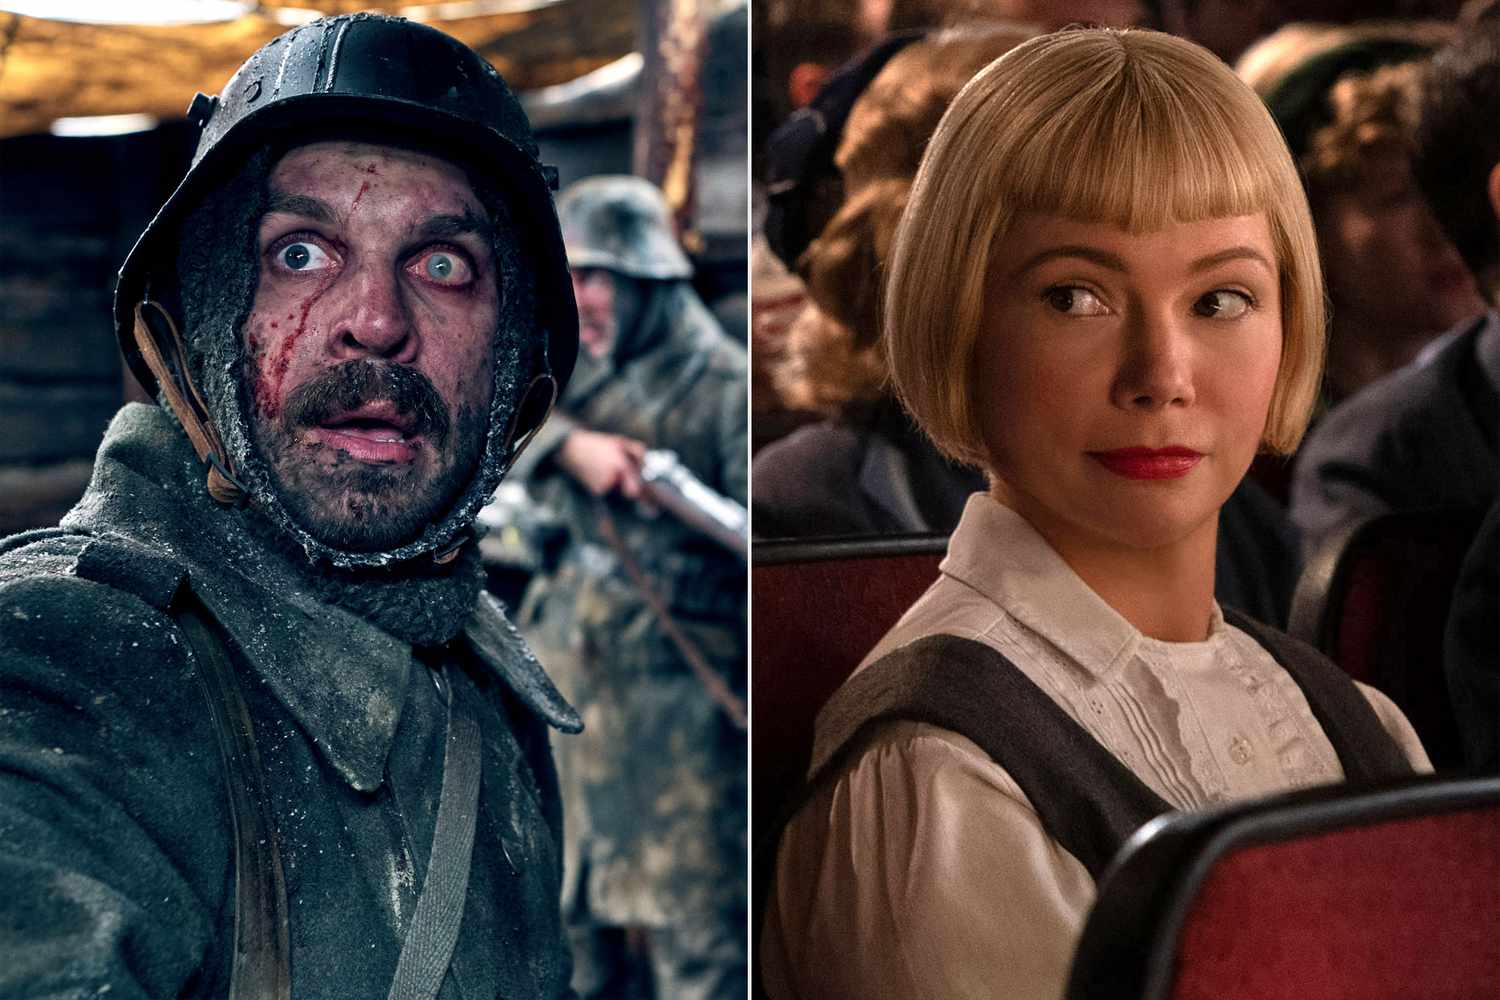 All Quiet on the Western Front; Michelle Williams in The Fabelmans